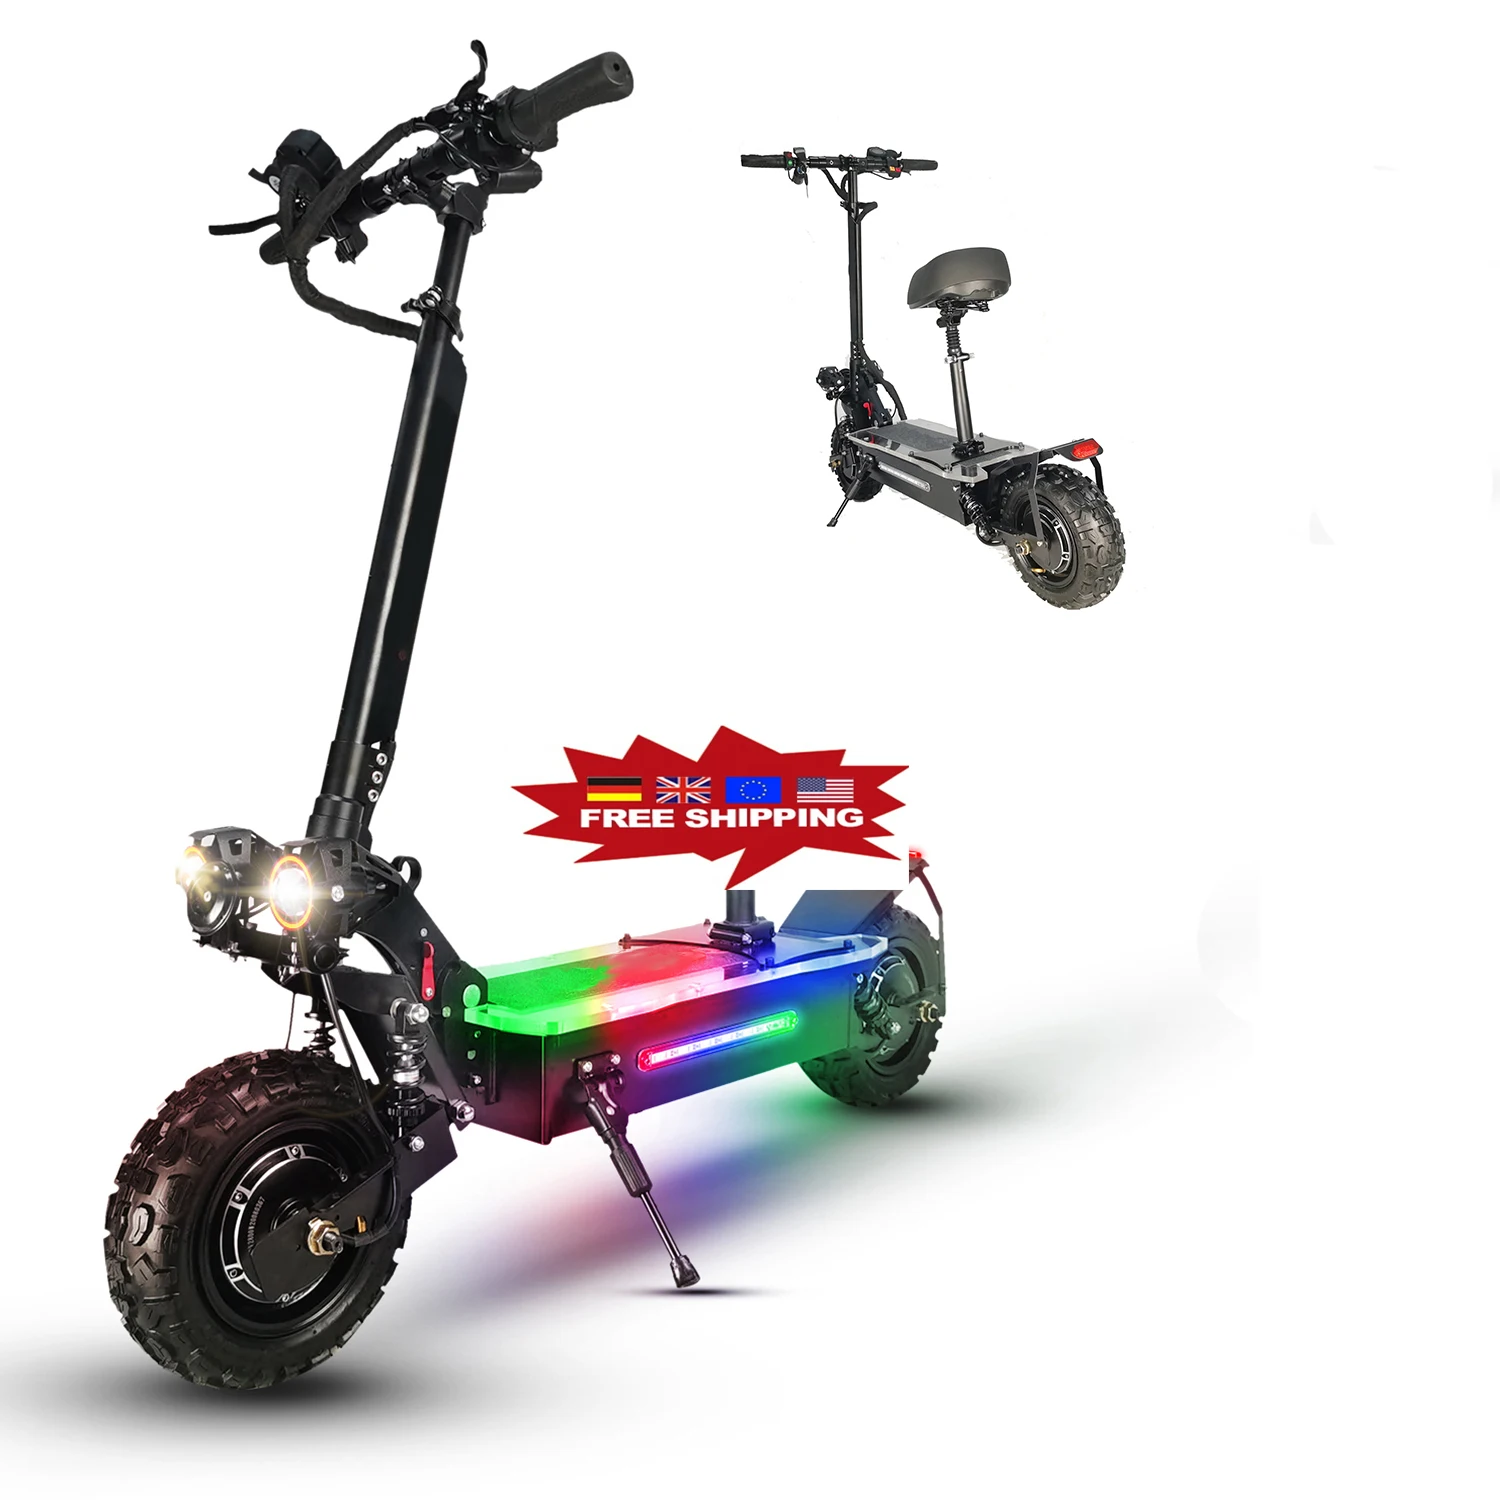 

Free shipping 80km/h DDP USA warehouse fast shipping 5600w 8000w 60v 11inch off-road powerful electric scooter foldable 60v